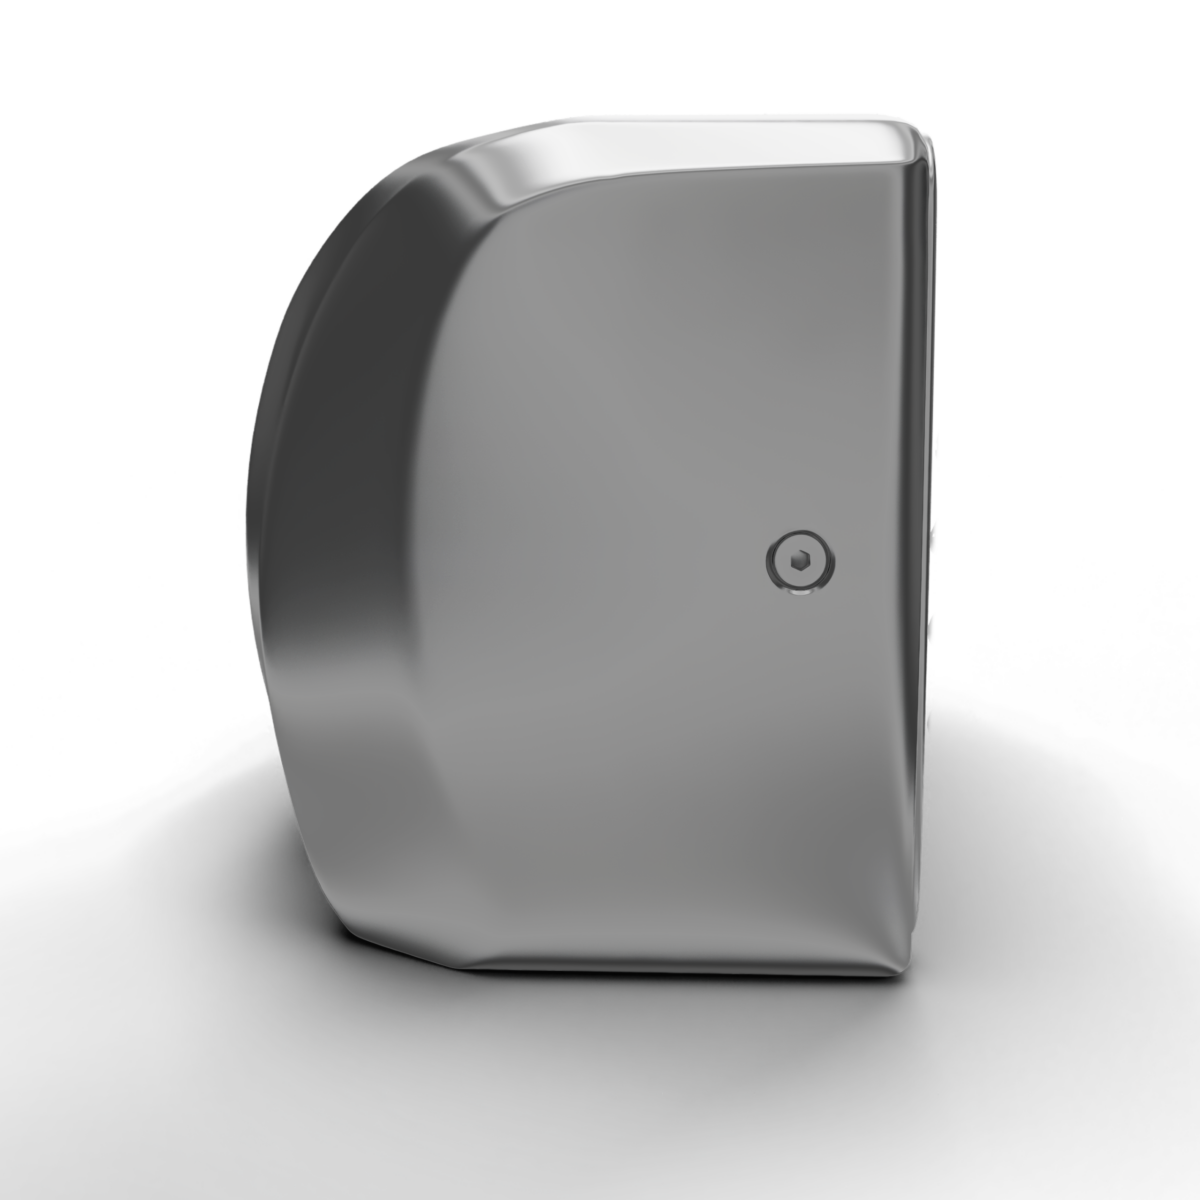 TrioAct Hand Dryer - Eco-Friendly Hand Dryer with Hepa Filter and UV Lighting - ABIS